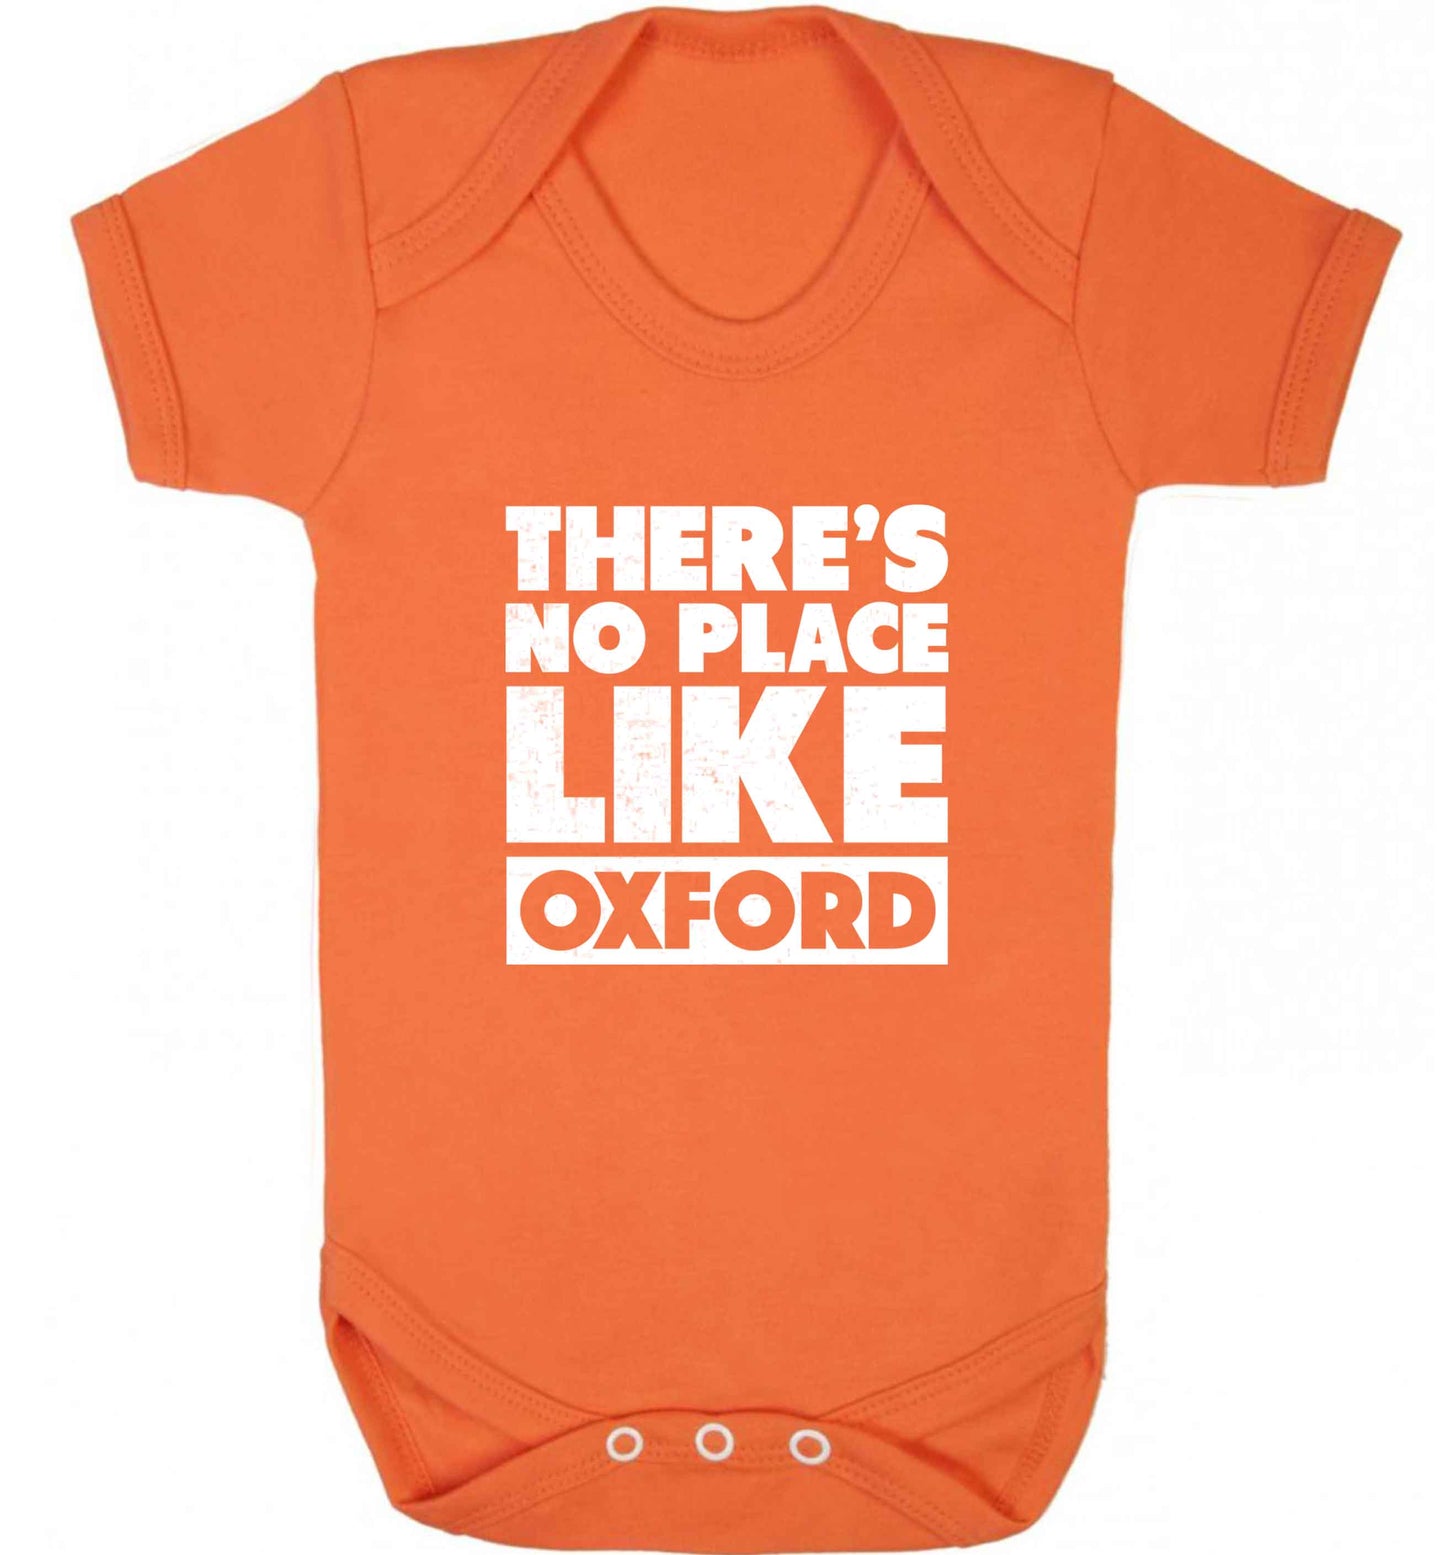 There's no place like Oxford baby vest orange 18-24 months